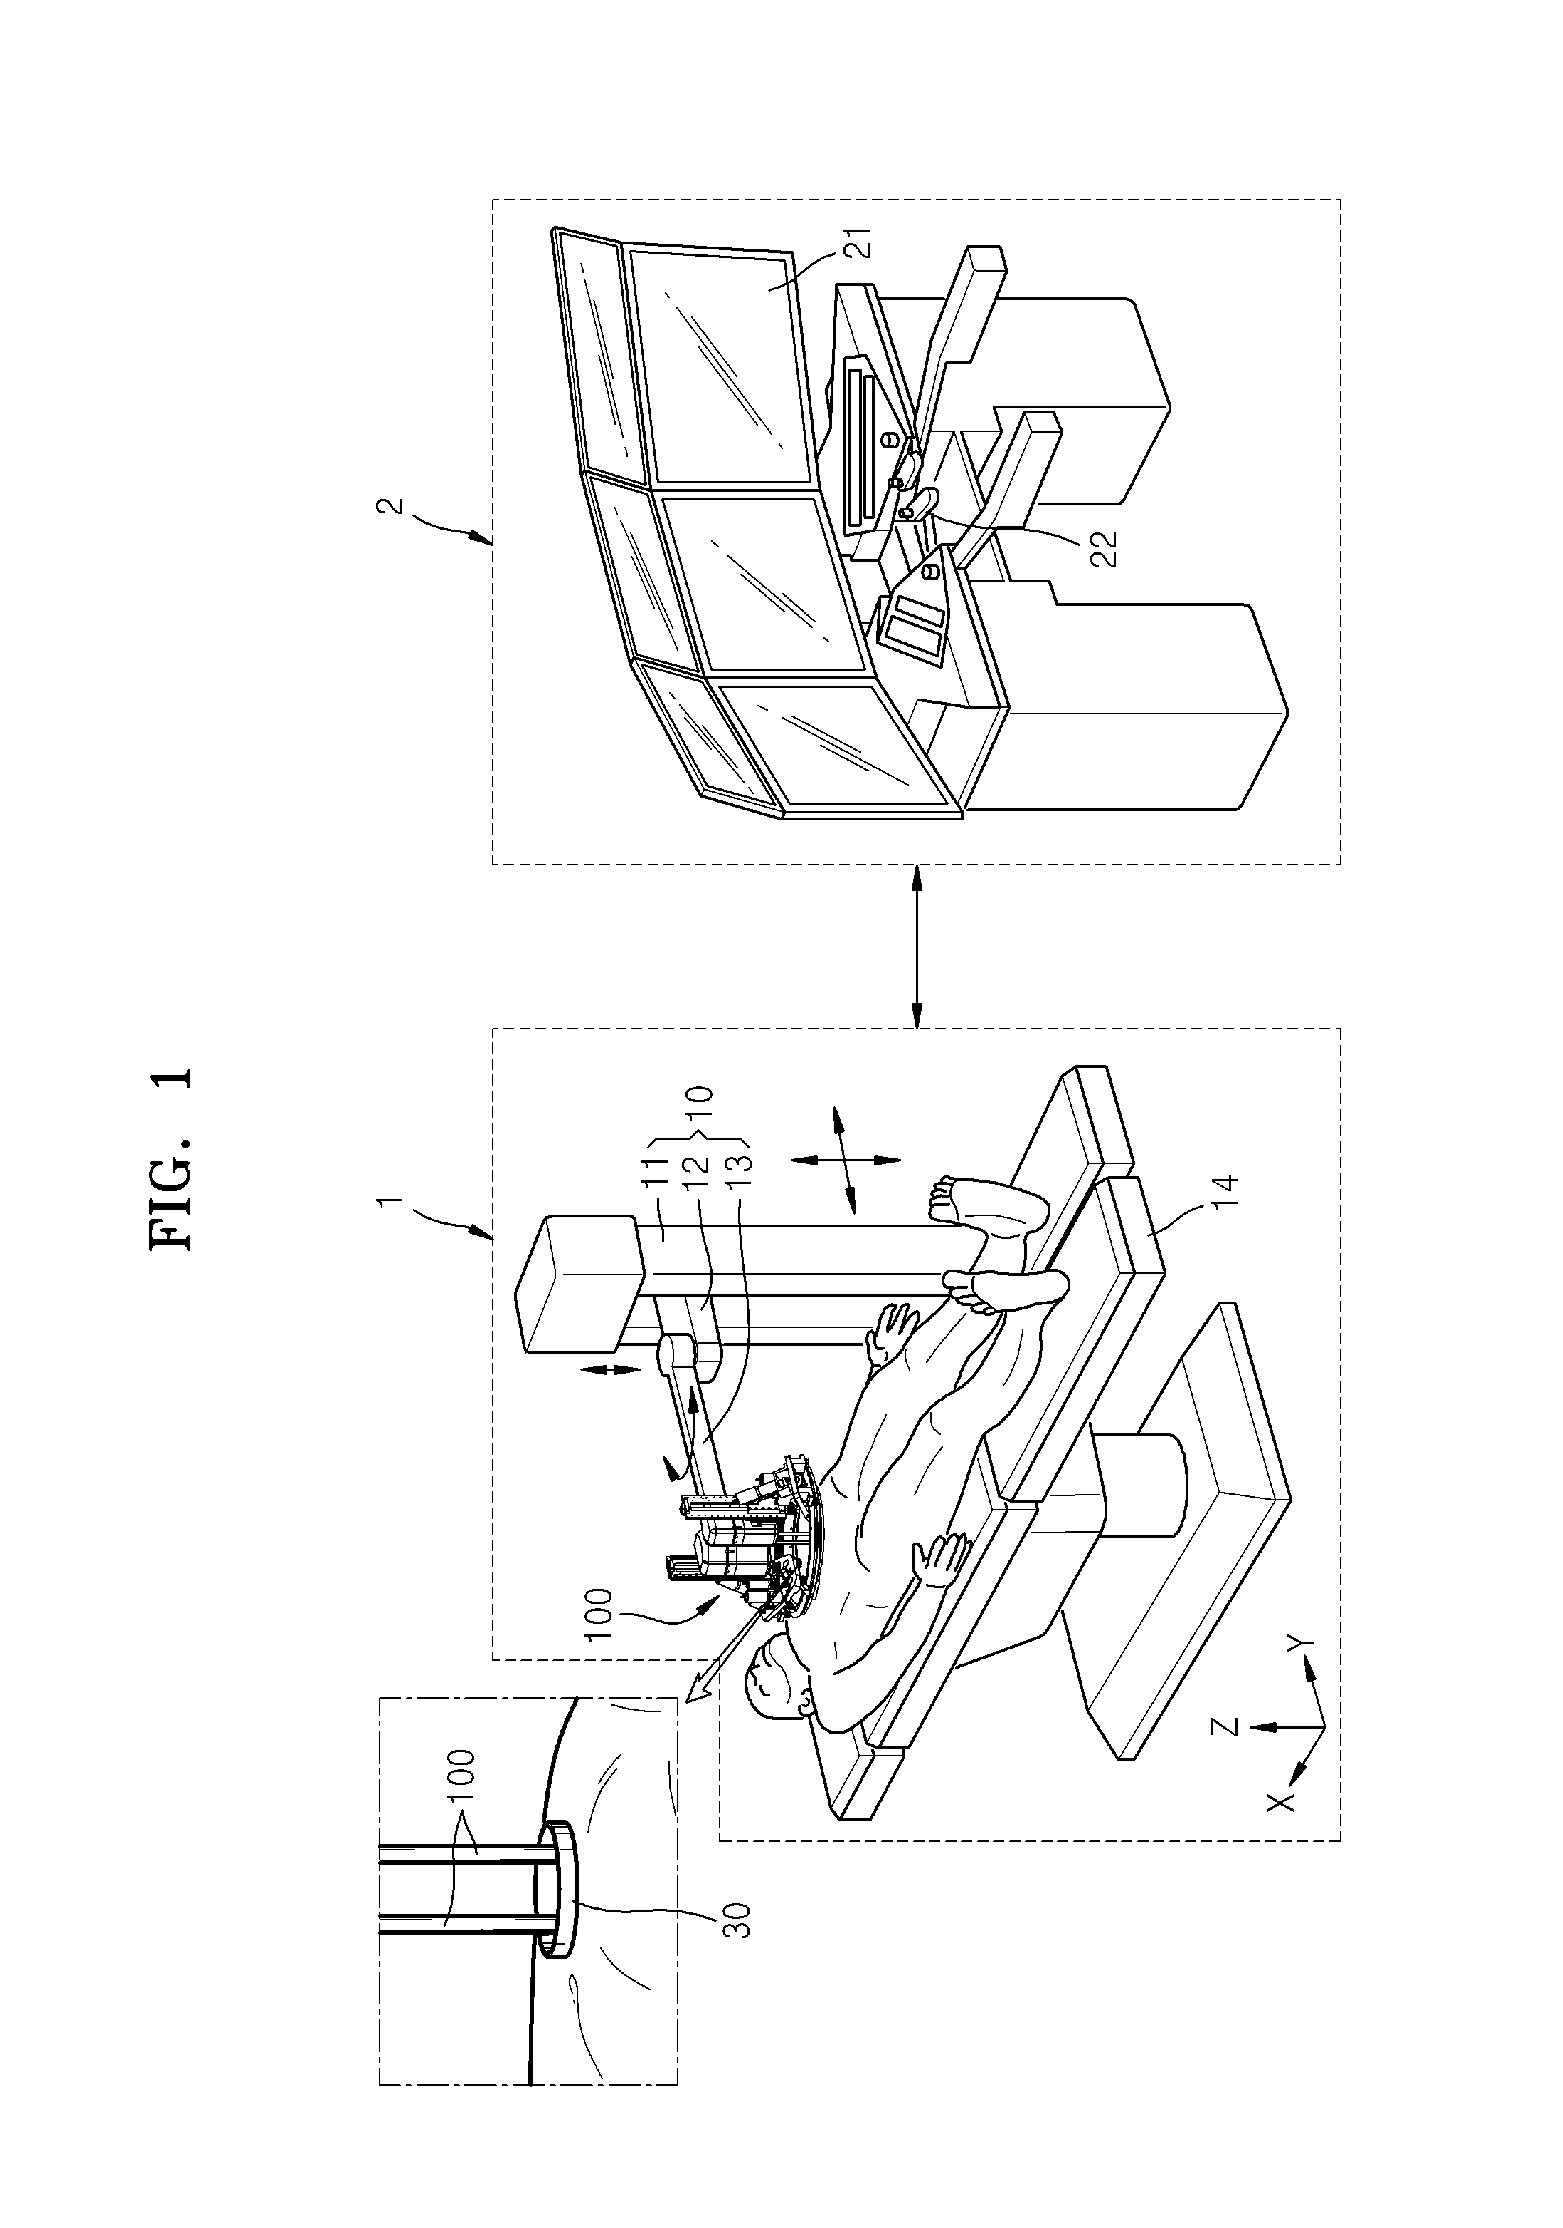 Surgical instrument, support equipment, and surgical robot system